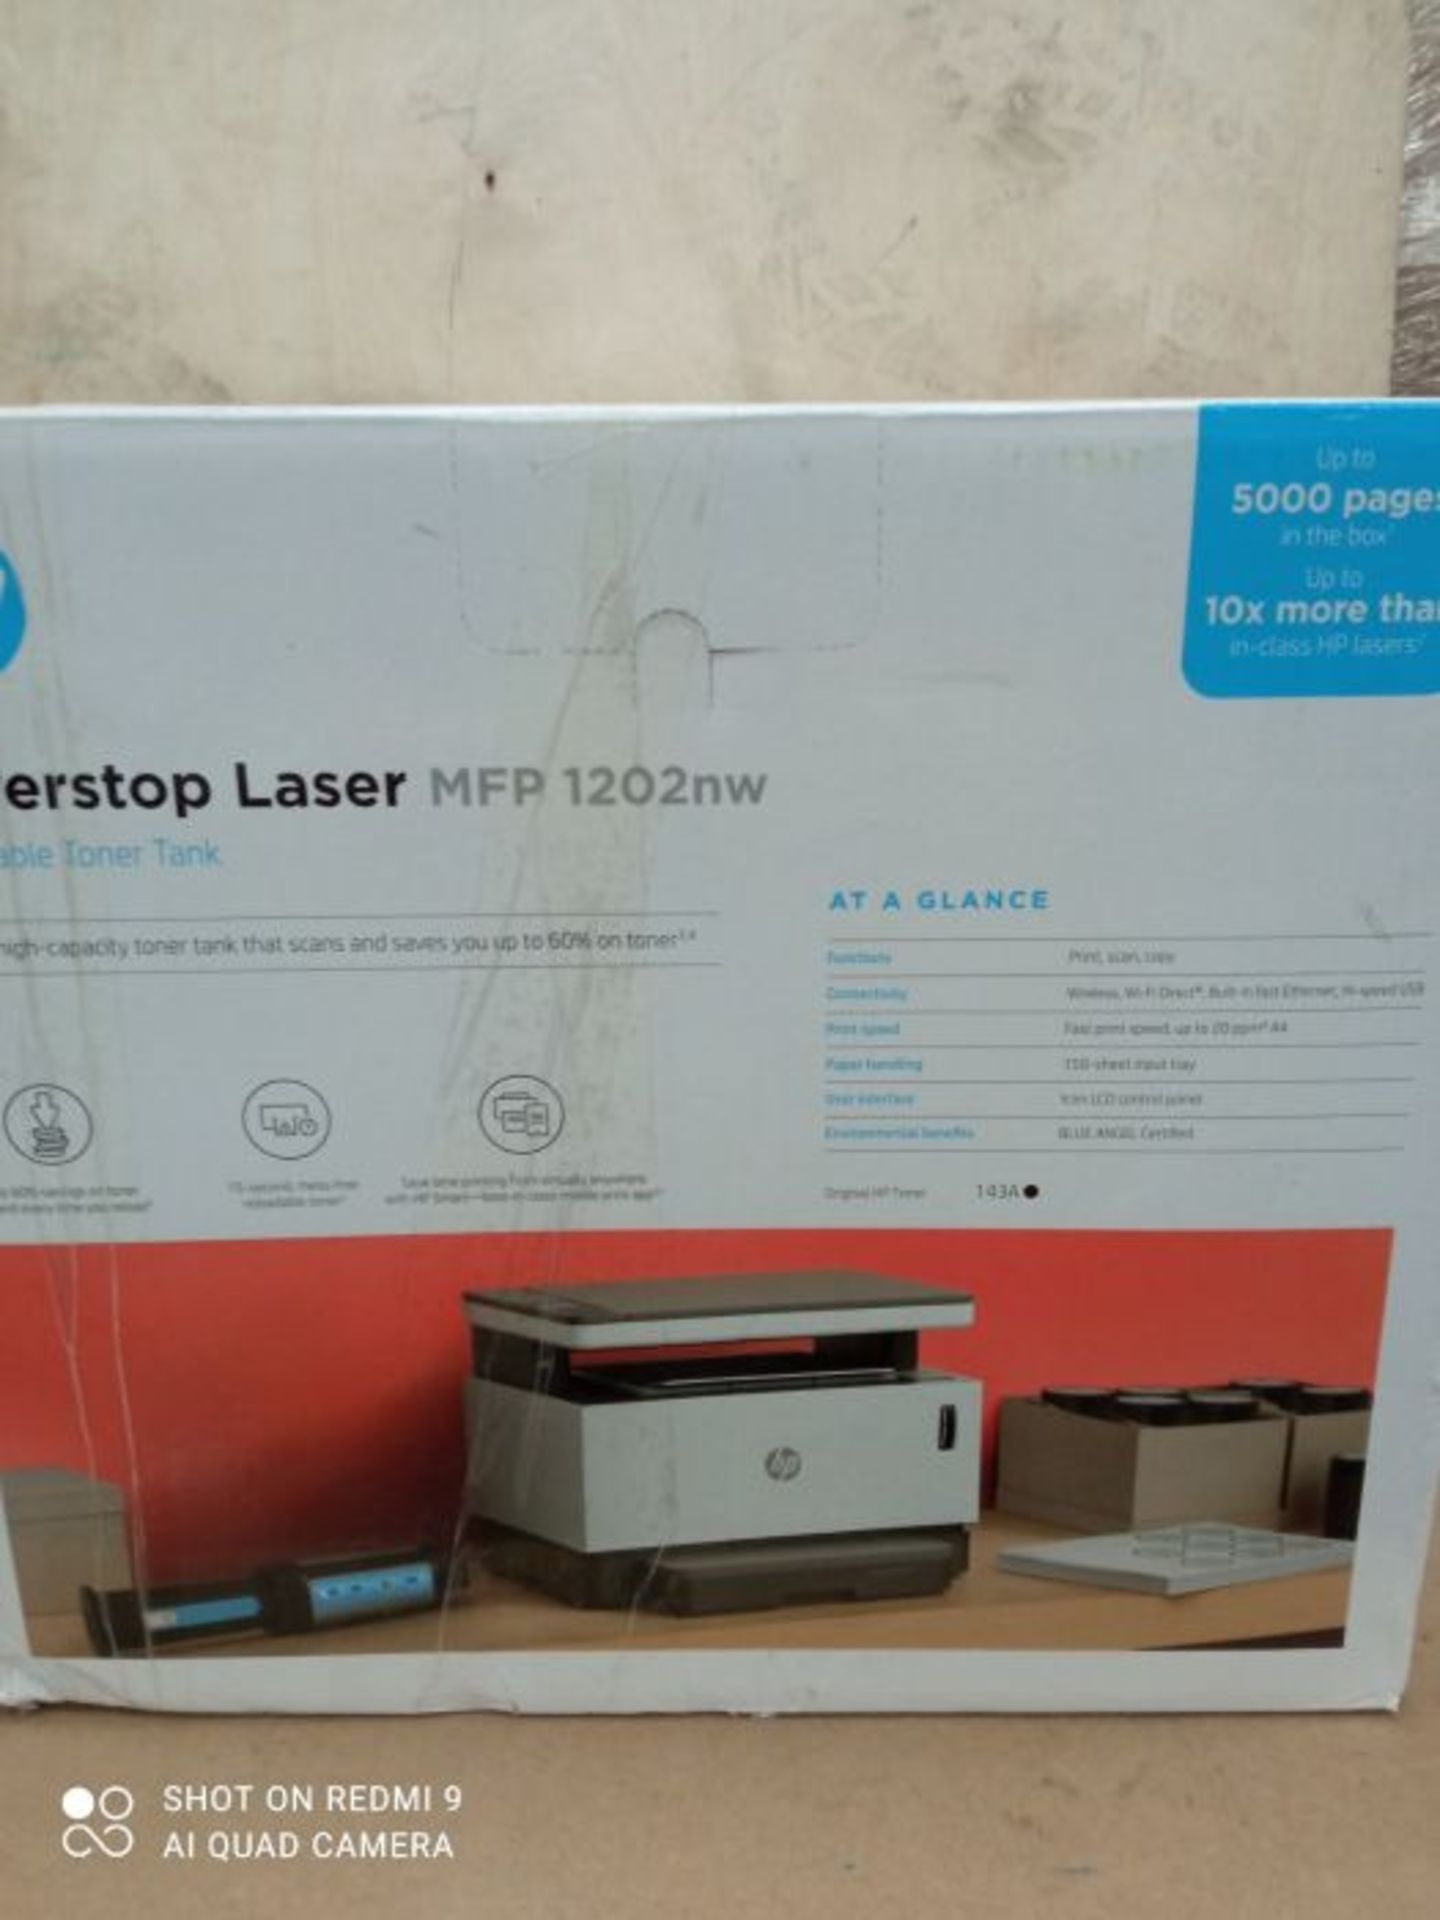 RRP £302.00 HP Neverstop Laser Printer 1202nw MFP with 5,000 Pages of Toner Inbox - Image 2 of 3